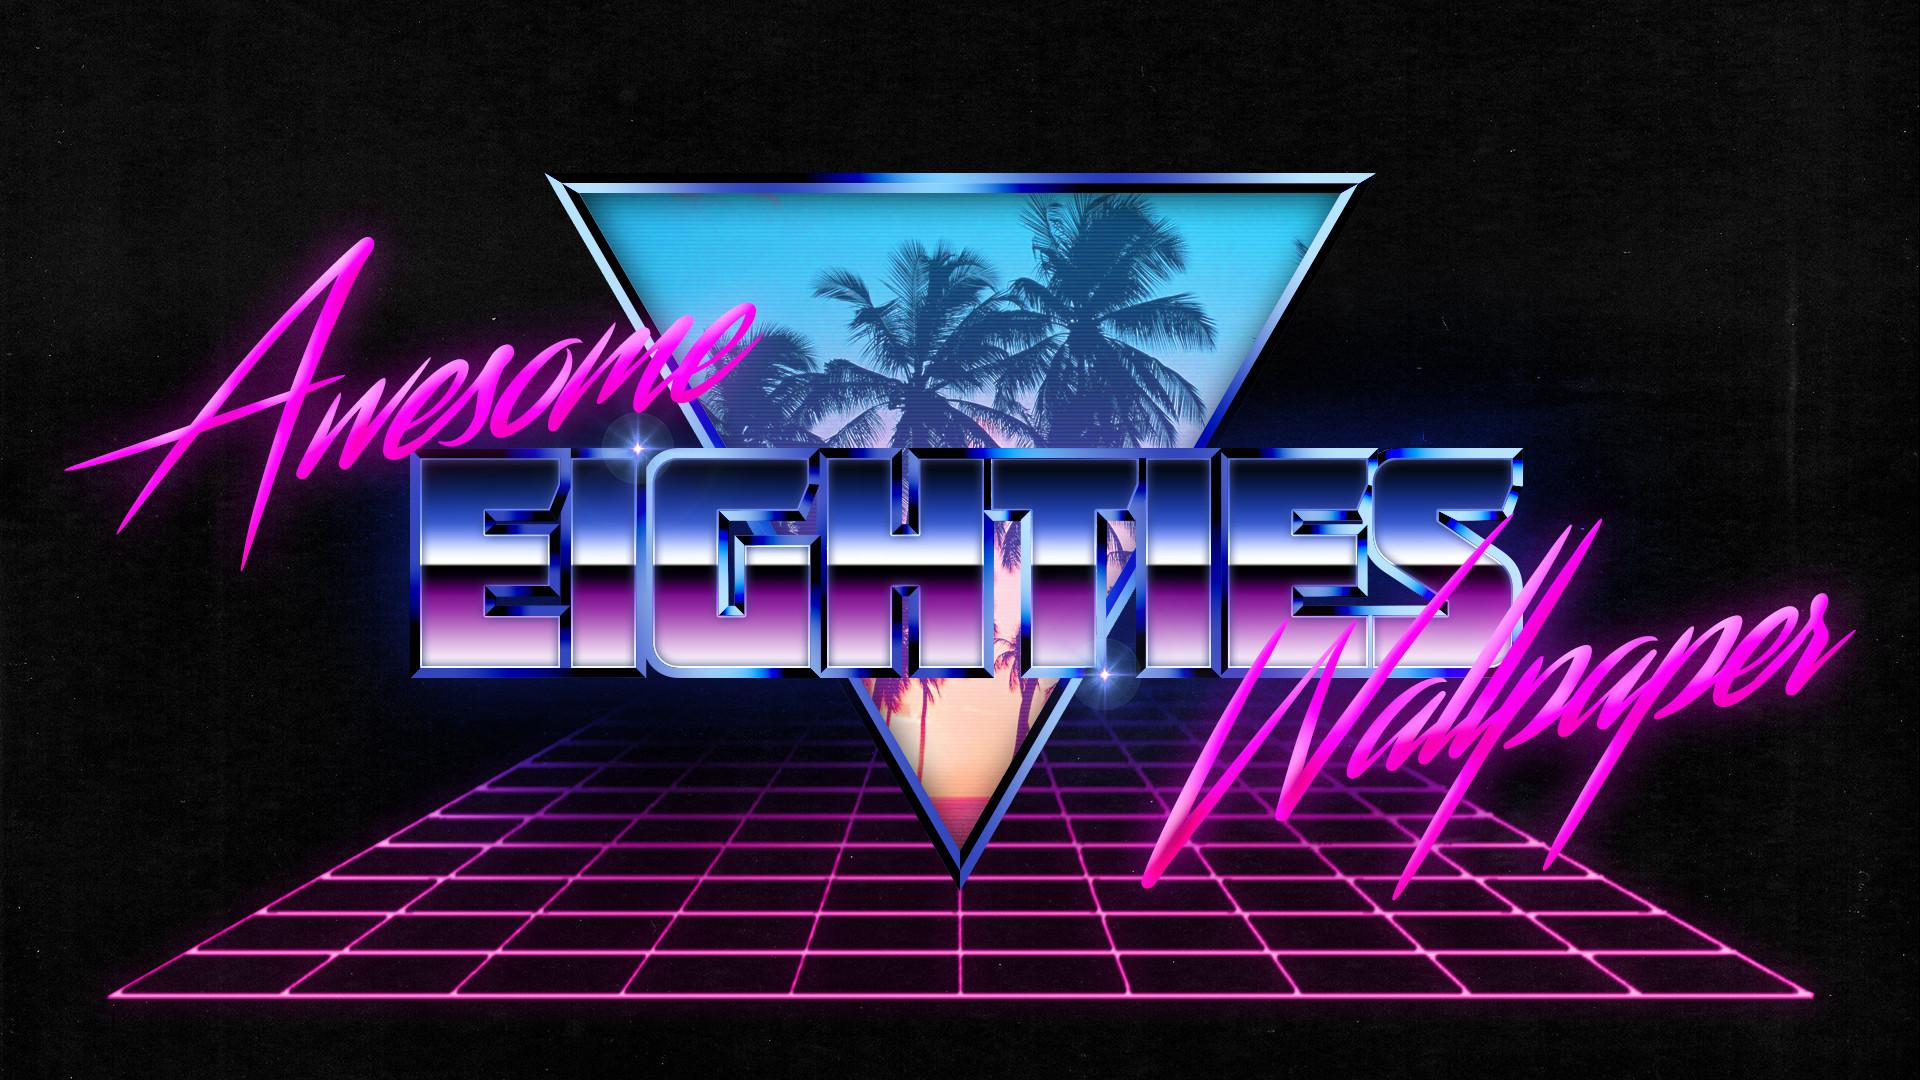 1920x1080 Awesome 80s Wallpaper by valithevali Awesome 80s Wallpaper by valithevali